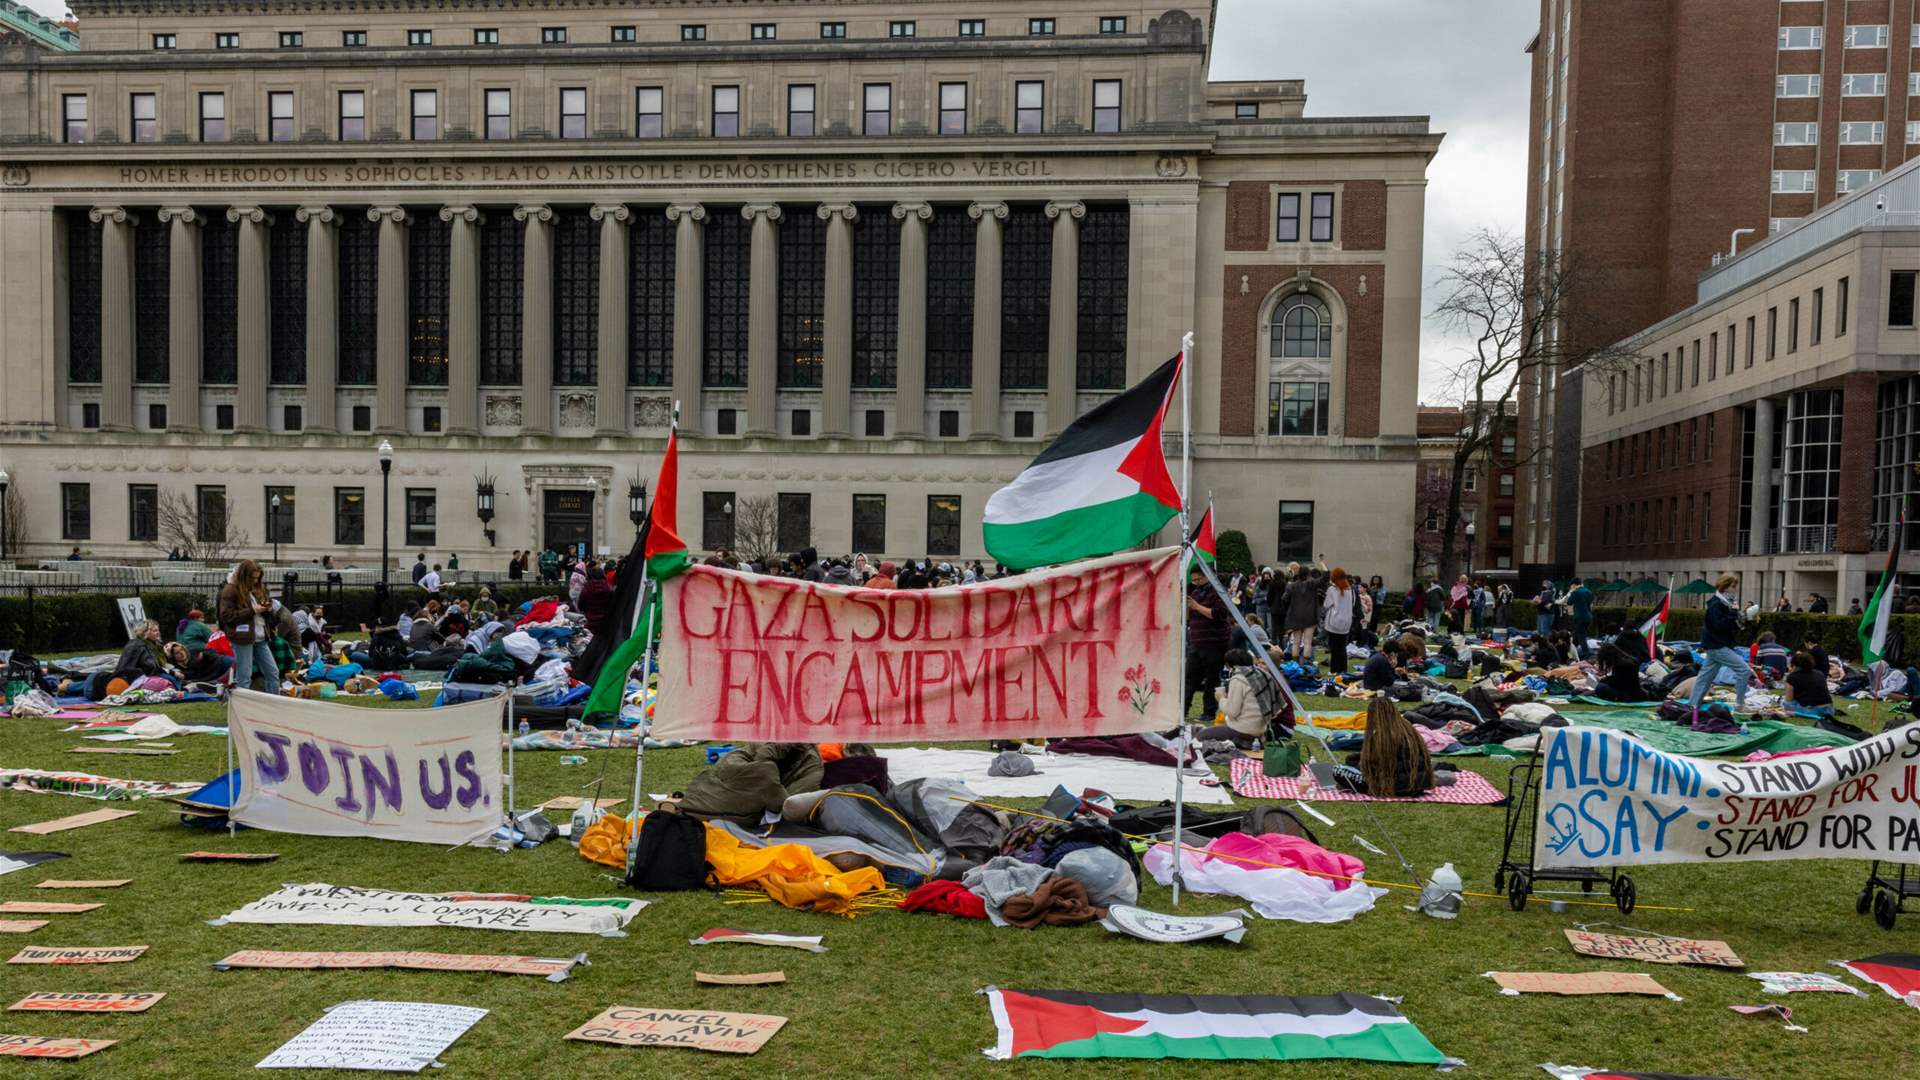 Columbia University threatens to &#39;expel&#39; students occupying one of its buildings